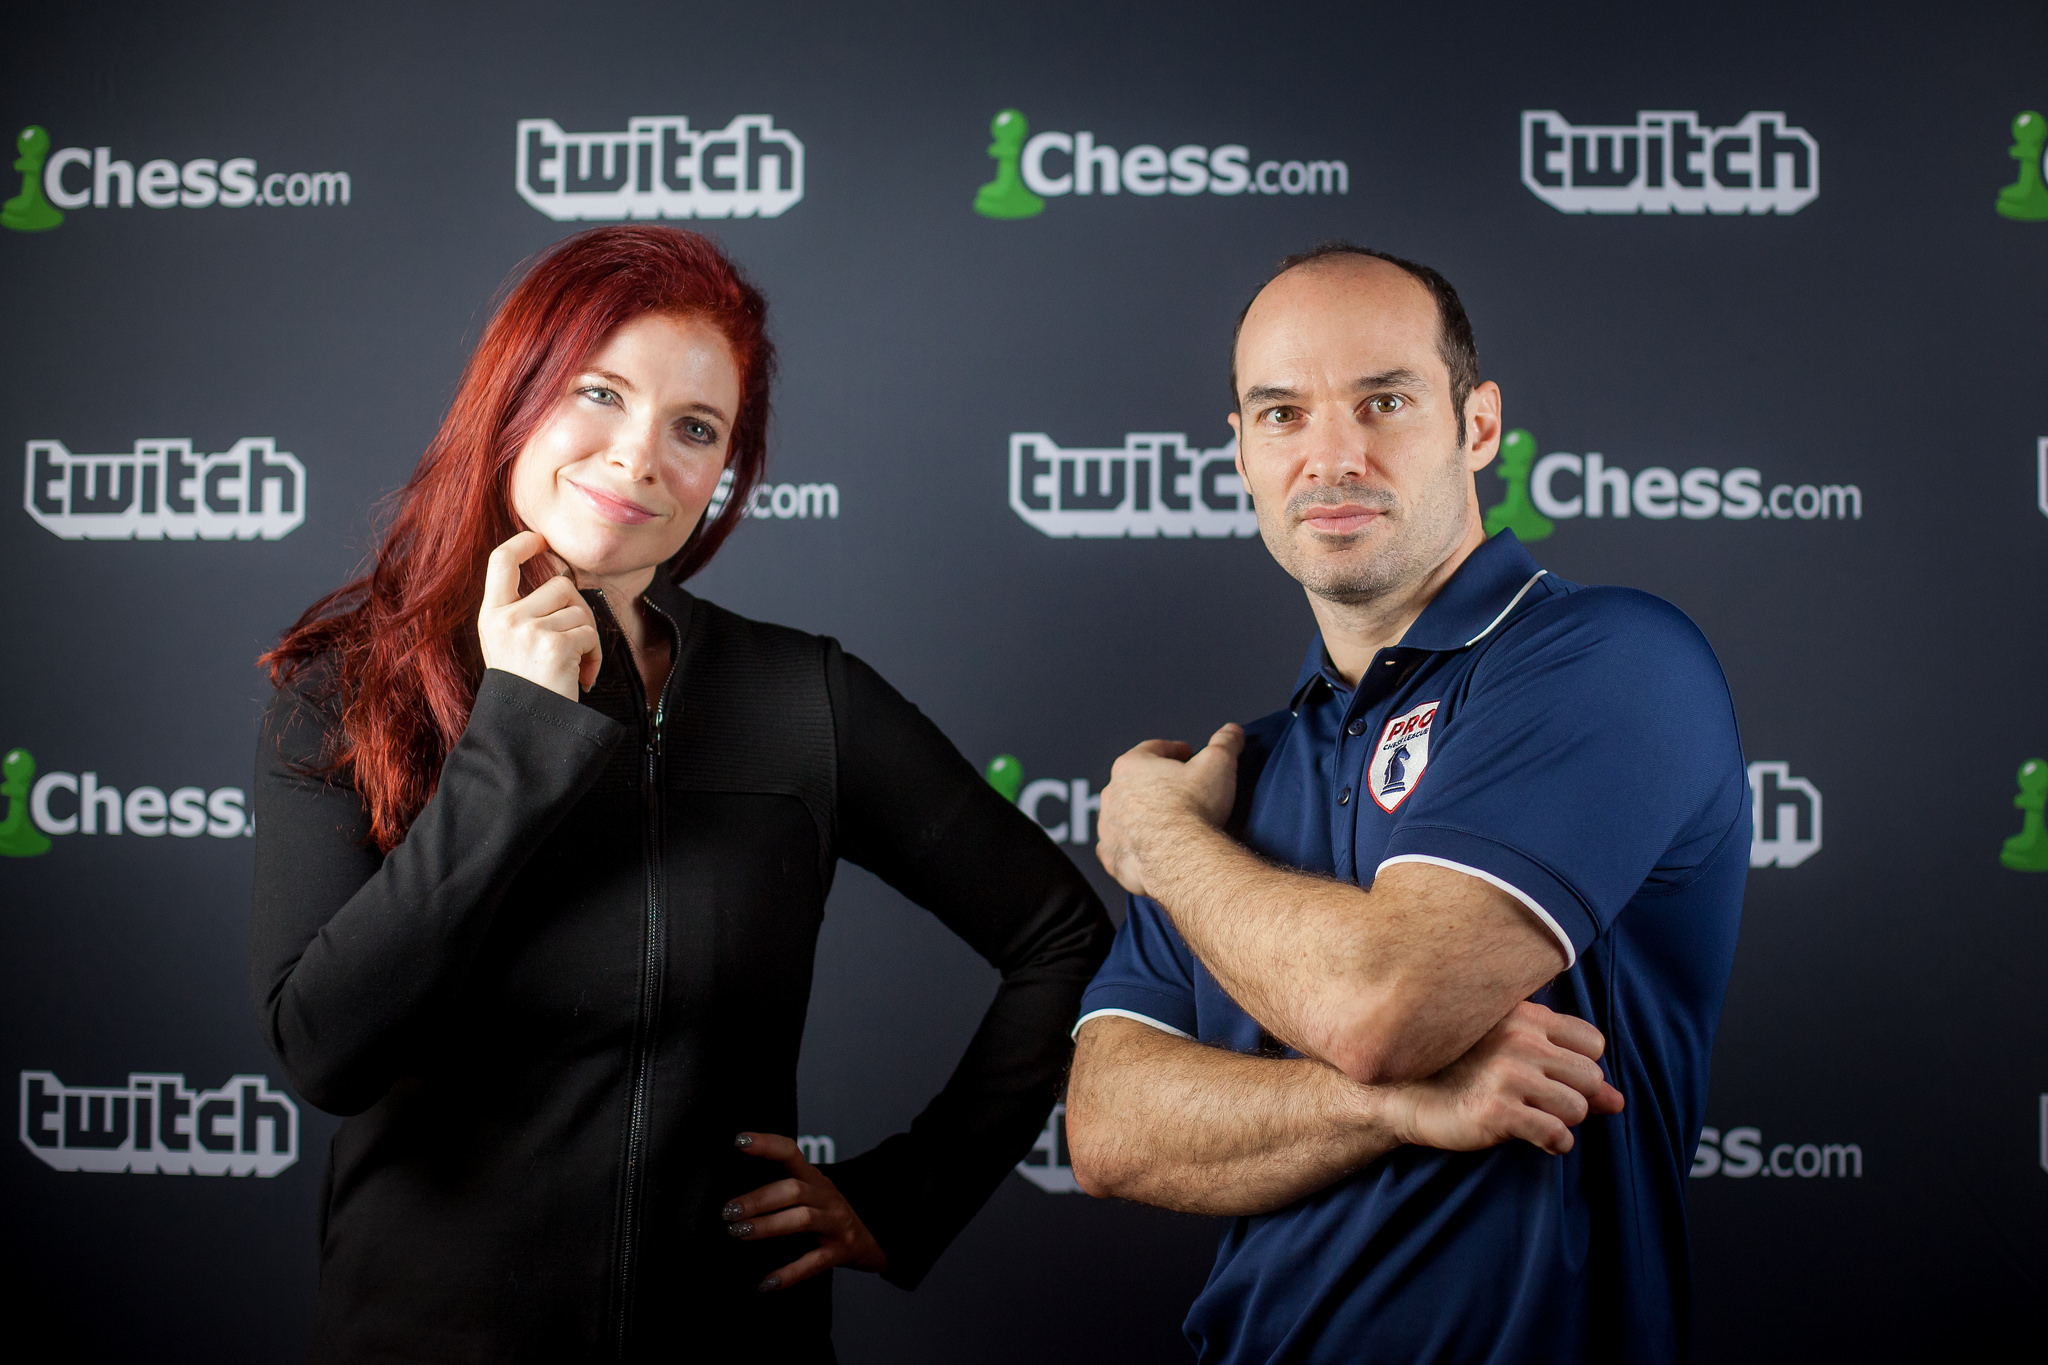 Botez and Shahade Families Team Up for Twitch Match